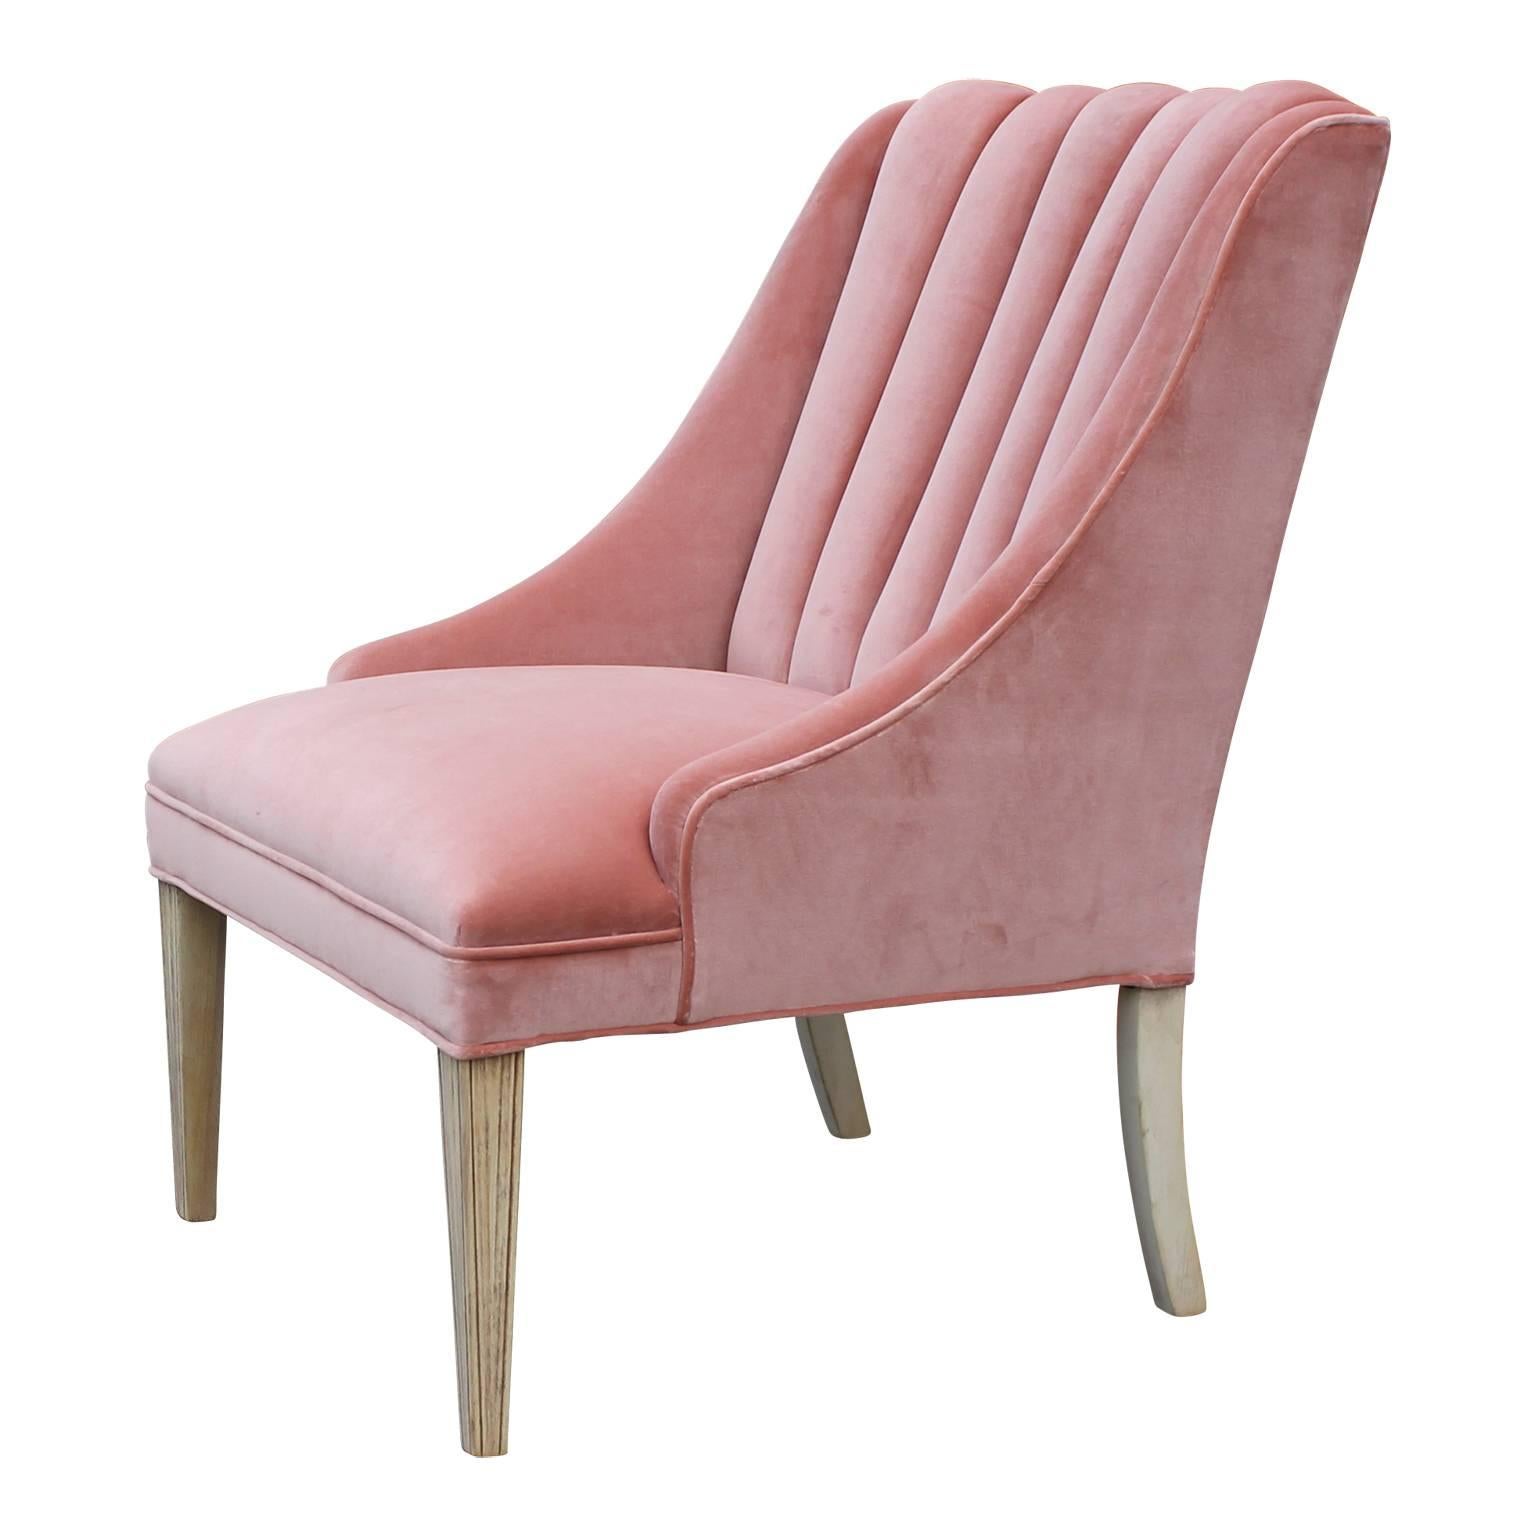 Pink velvet and bleached wood Dunbar style lounge chair. Fully Restored.